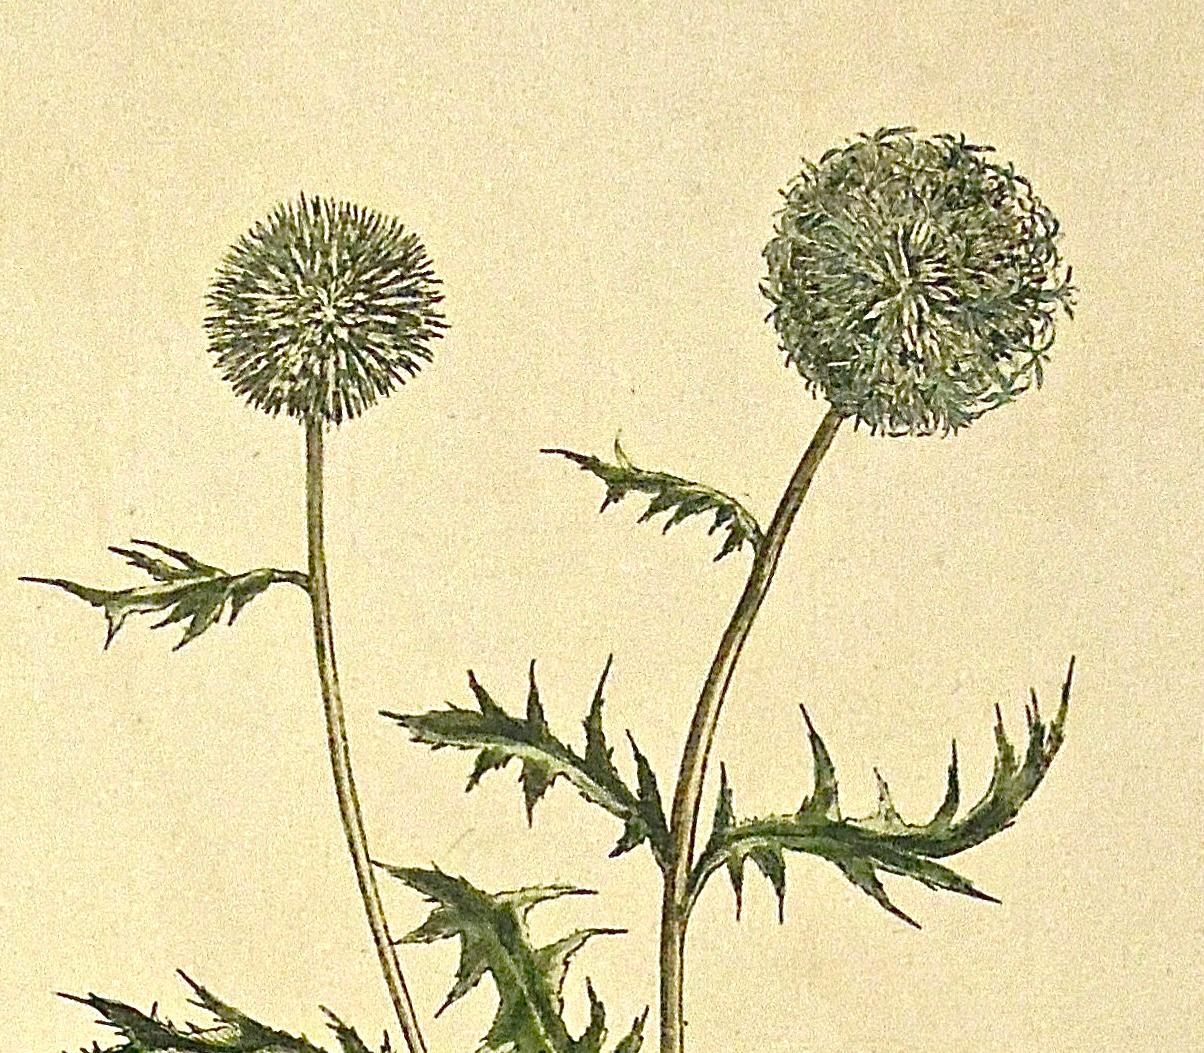 Echinops.
Upper Right: Pl. CXXX. Lower Left: R. Lancake delin. Lower Center: Publish'd according to Act of Parliament by P. Miller Novem. the 30th 1756. Lower Right: I. S. Miller Sculp.
Author: Philip Miller
Source / Publication: The Gardener's